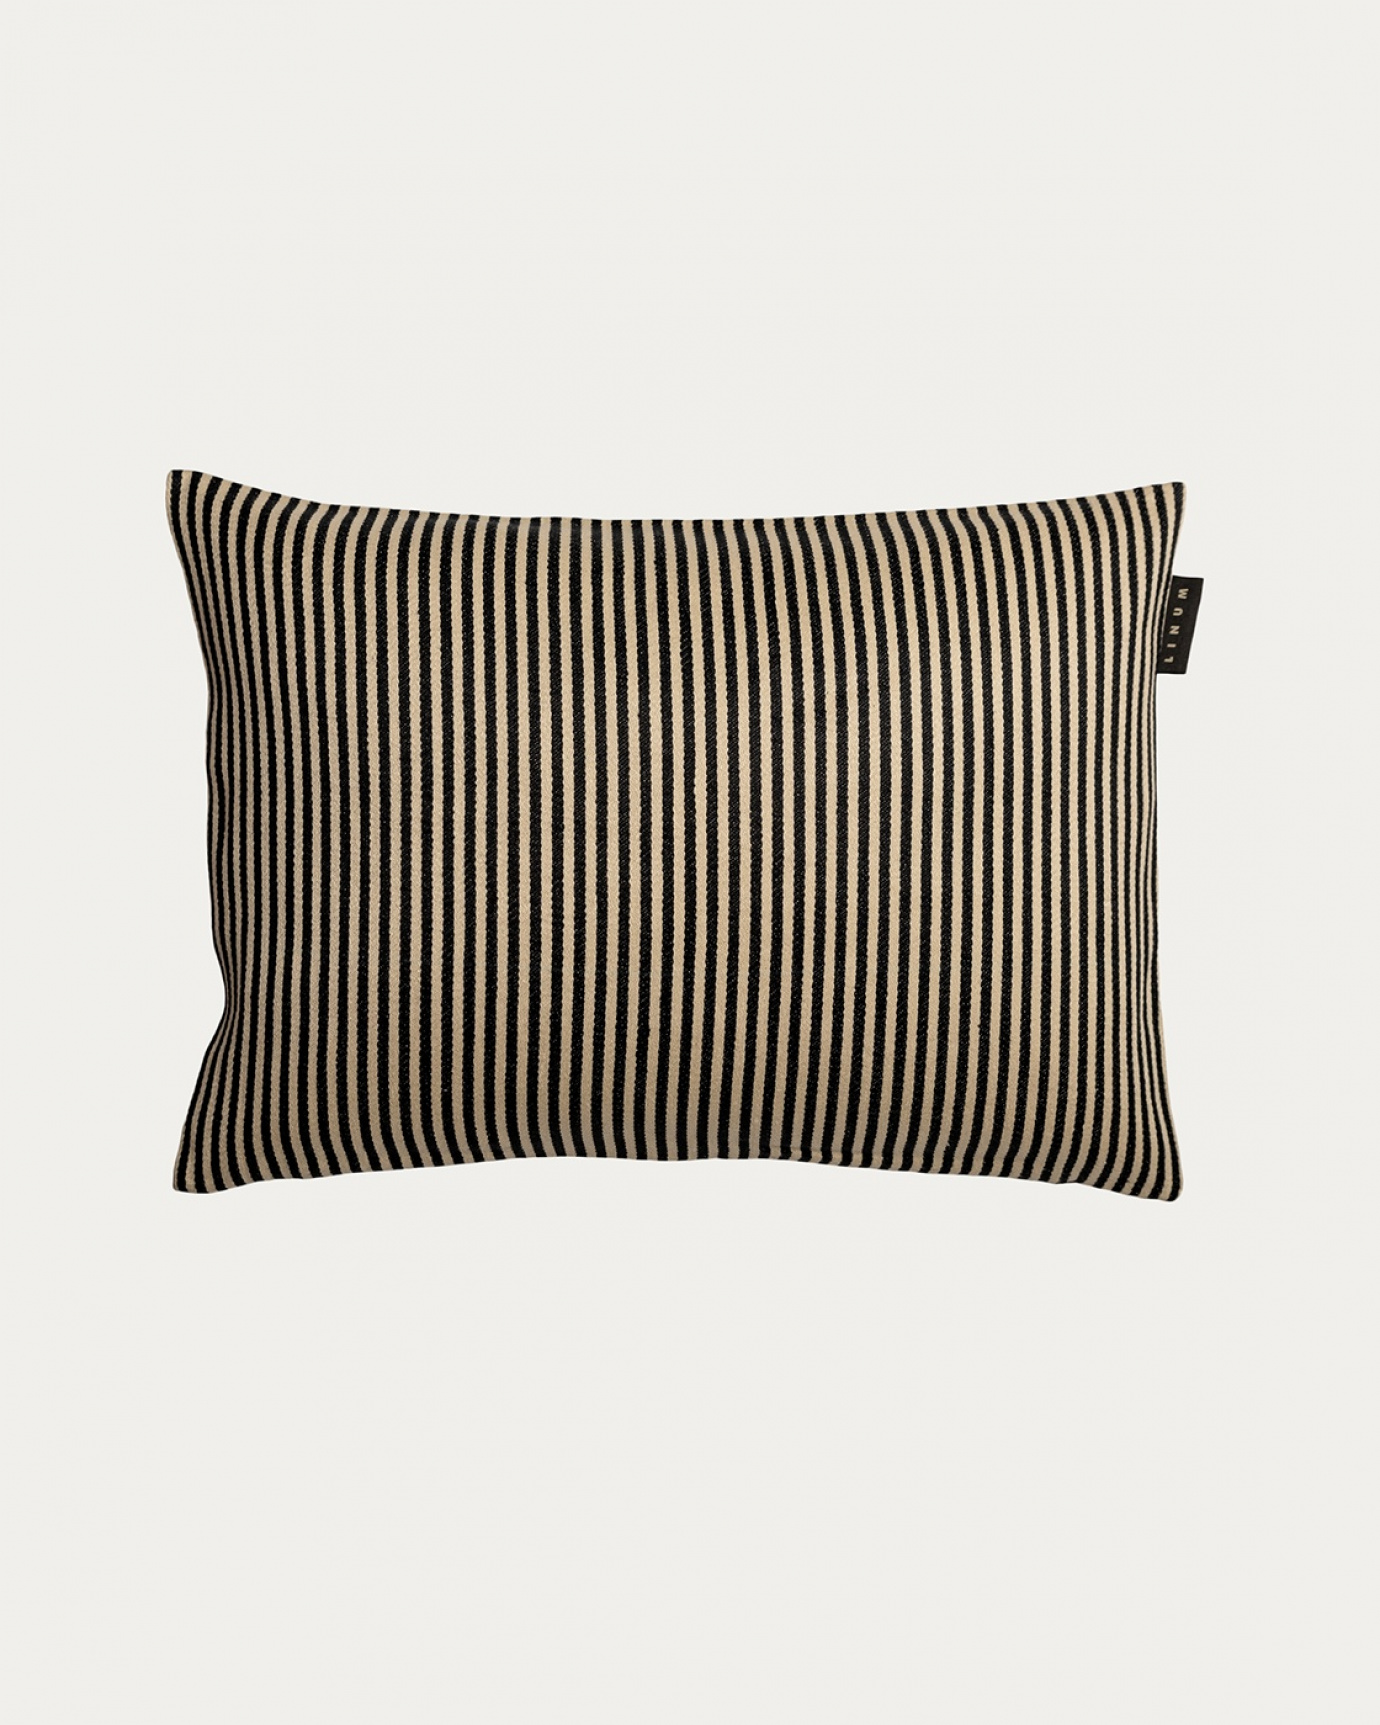 Product image black CALCIO cushion cover with thin stripes of 77% linen and 23% cotton from LINUM DESIGN. Size 35x50 cm.